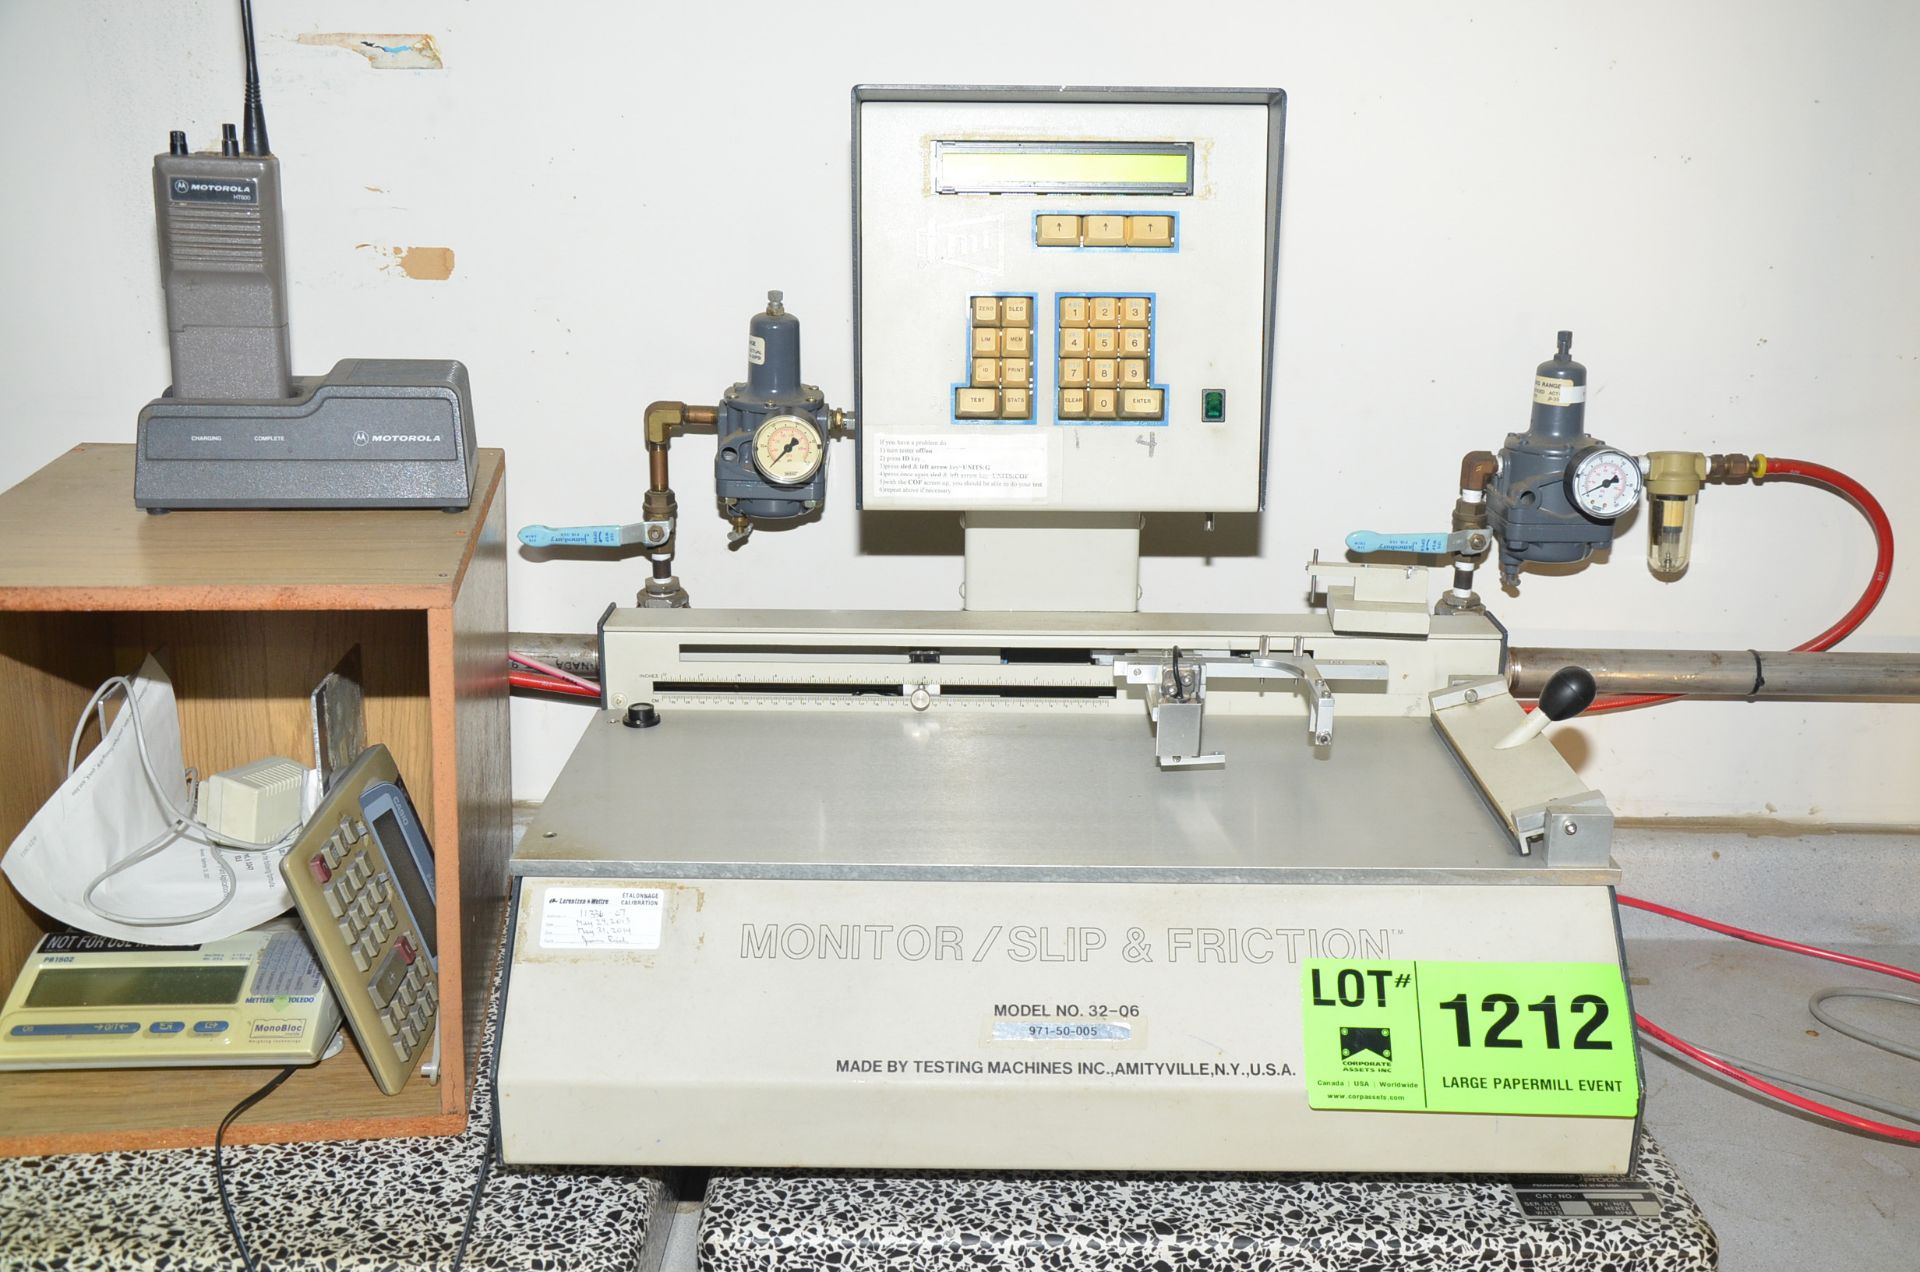 LOT/ TESTING MACHINES INC. MODEL 32-06 MONITOR/SLIP&FRICTION DIGITAL TESTER WITH DIGITAL SCALE AND